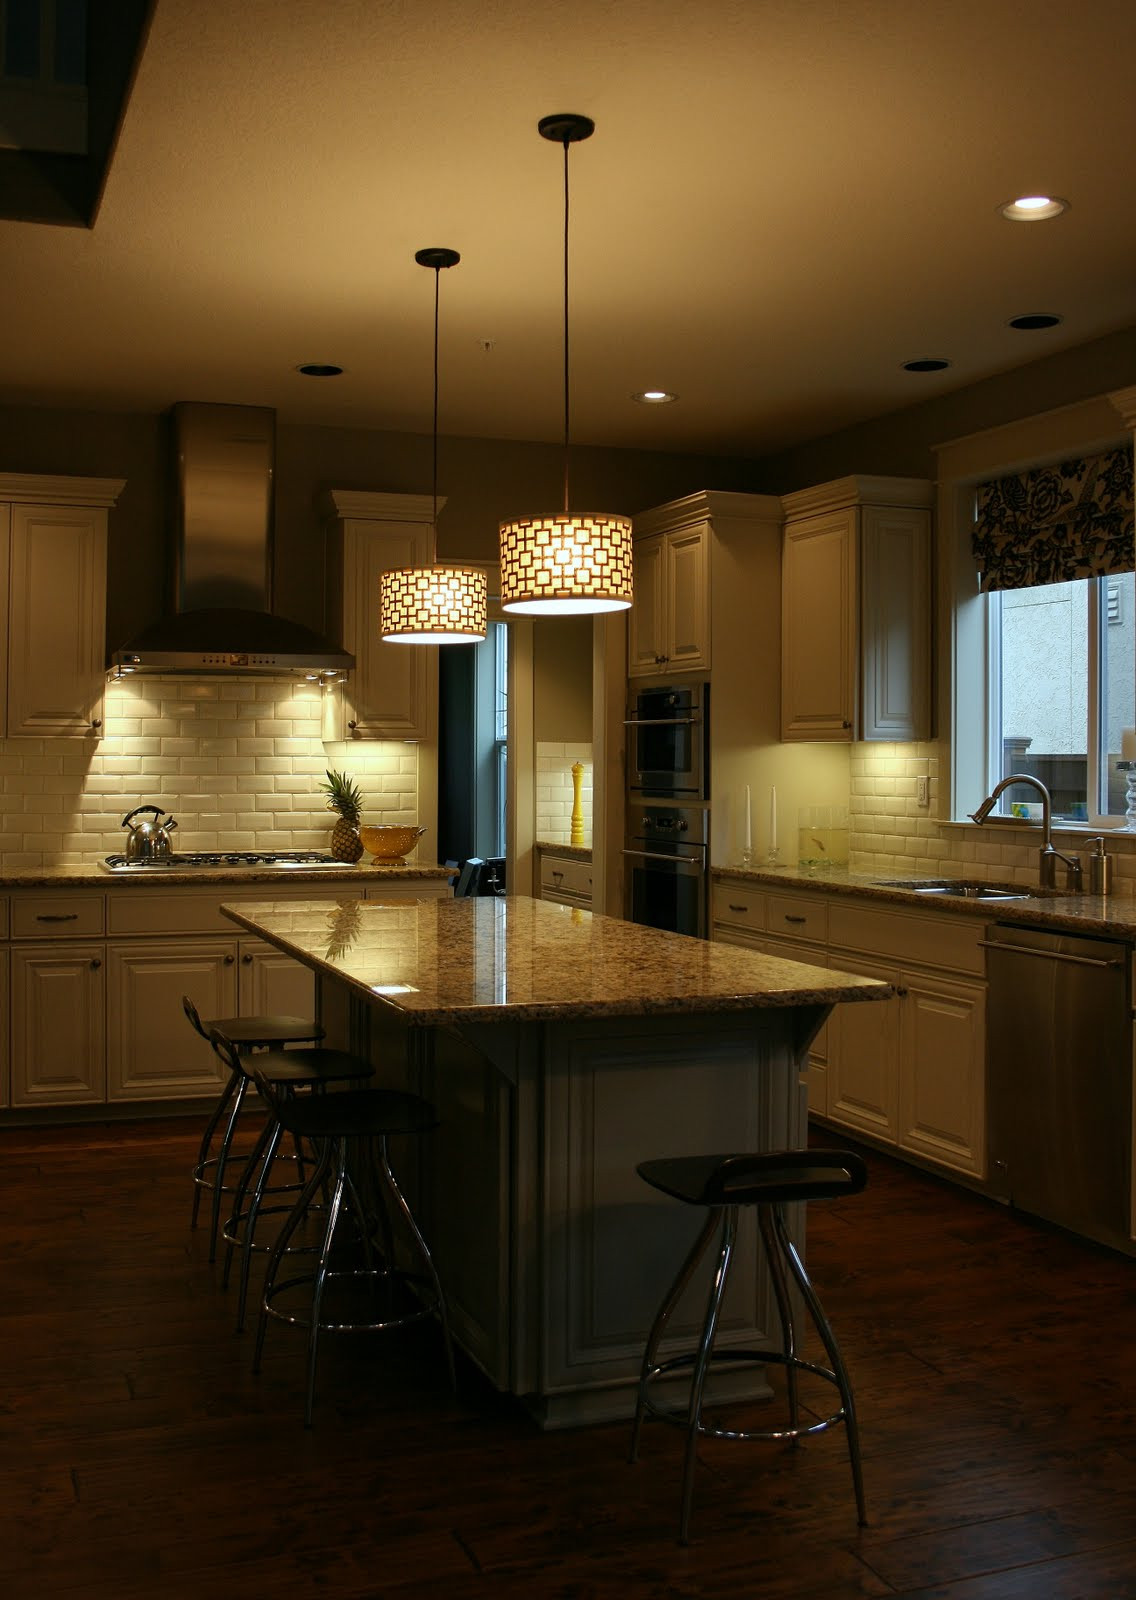 Pendant Kitchen Island Lights
 Kitchen Island Lighting System with Pendant and Chandelier